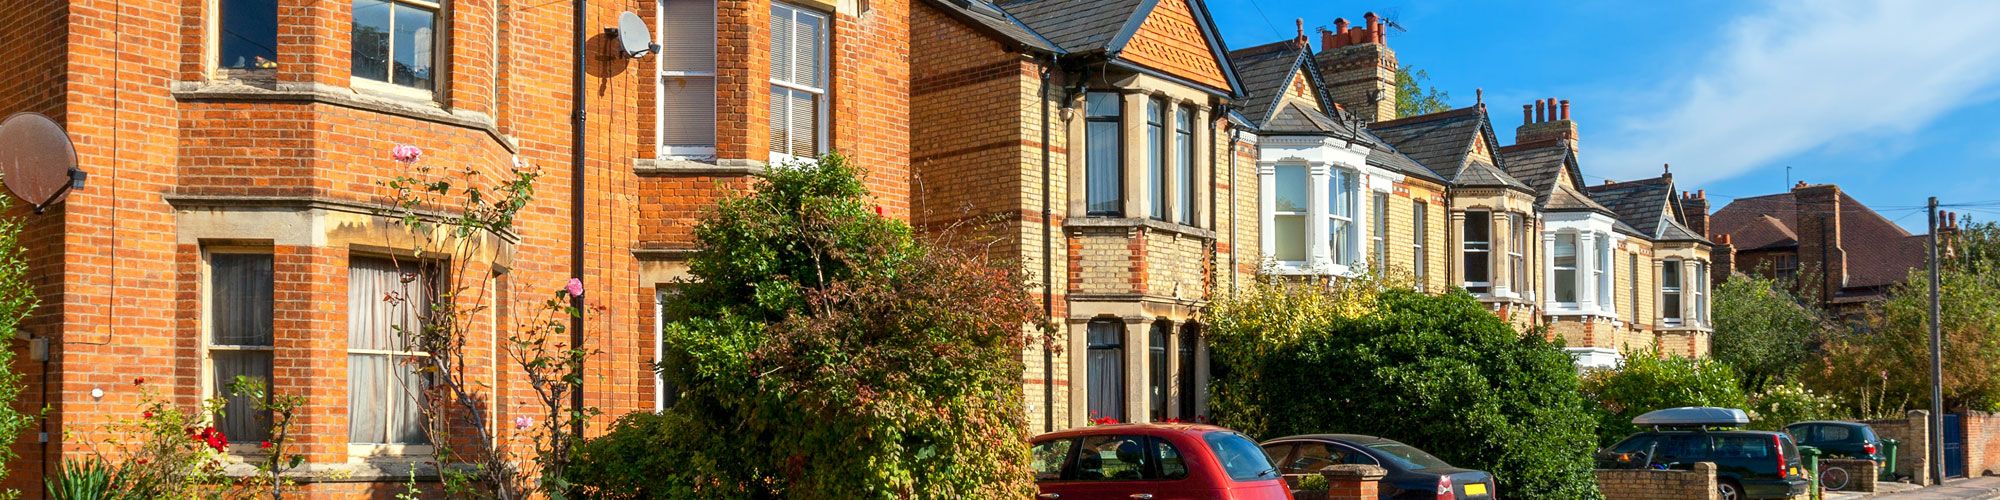 Apartments for rent near Chester